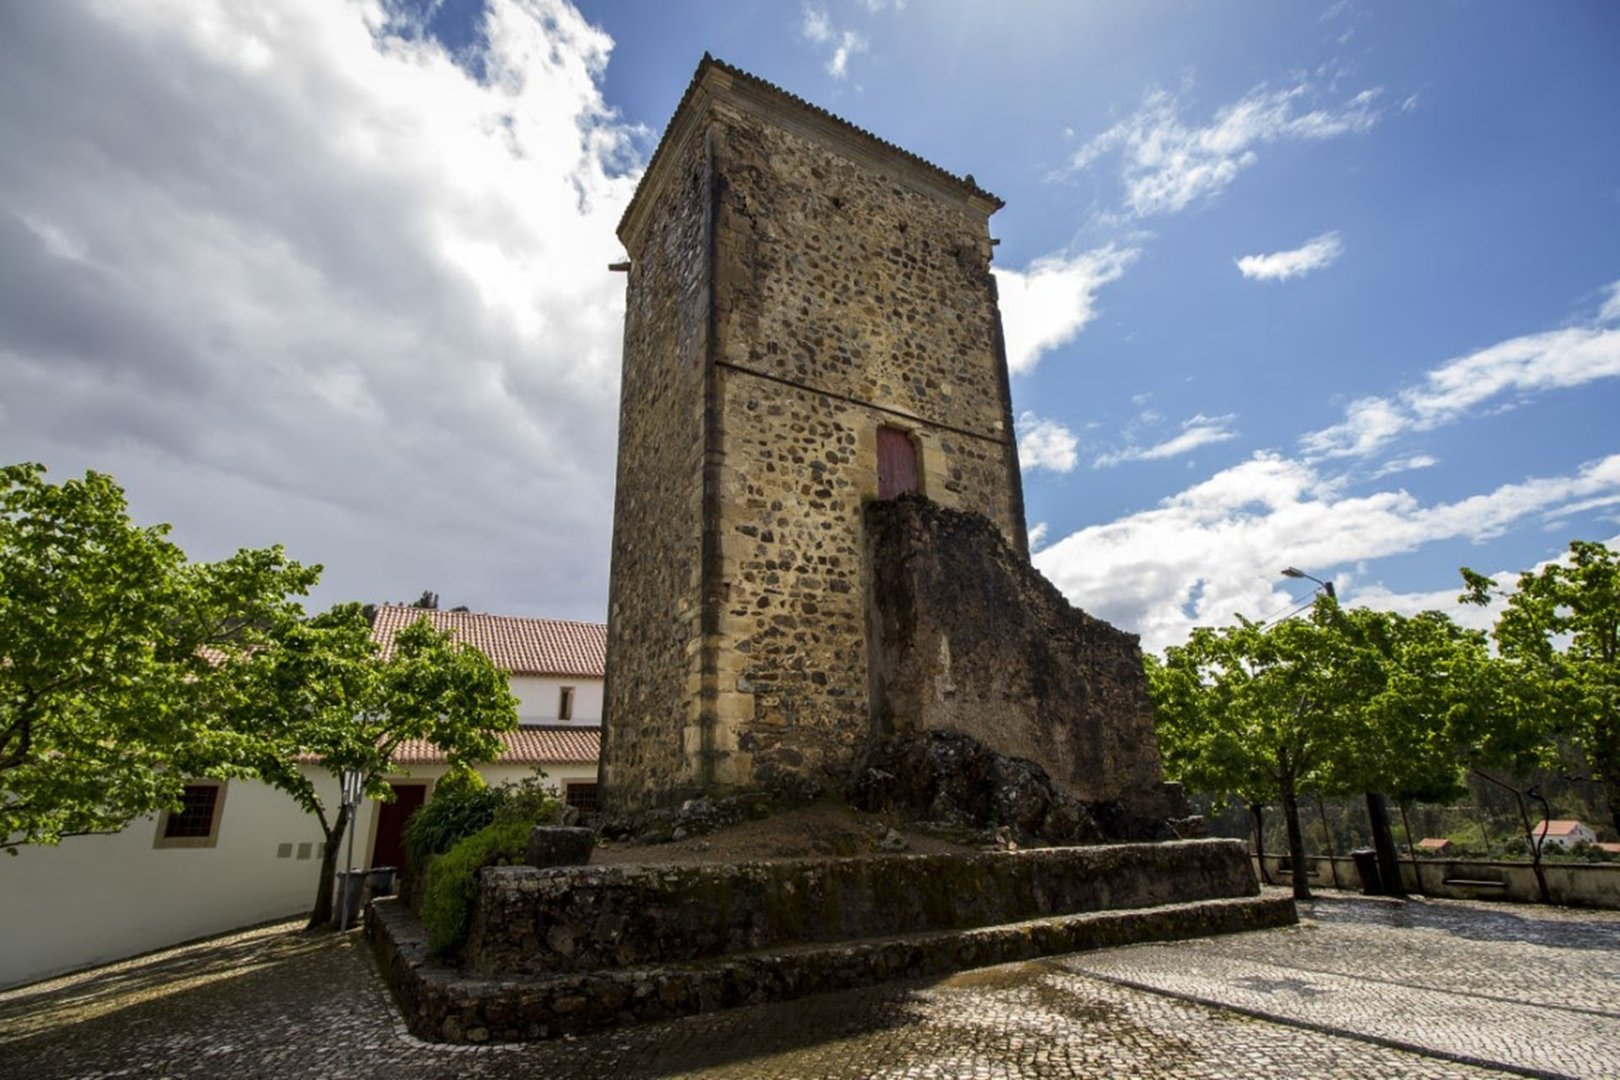 Templar Tower framed in the churchyard of the Sanctuary of Our Lady of Pranto